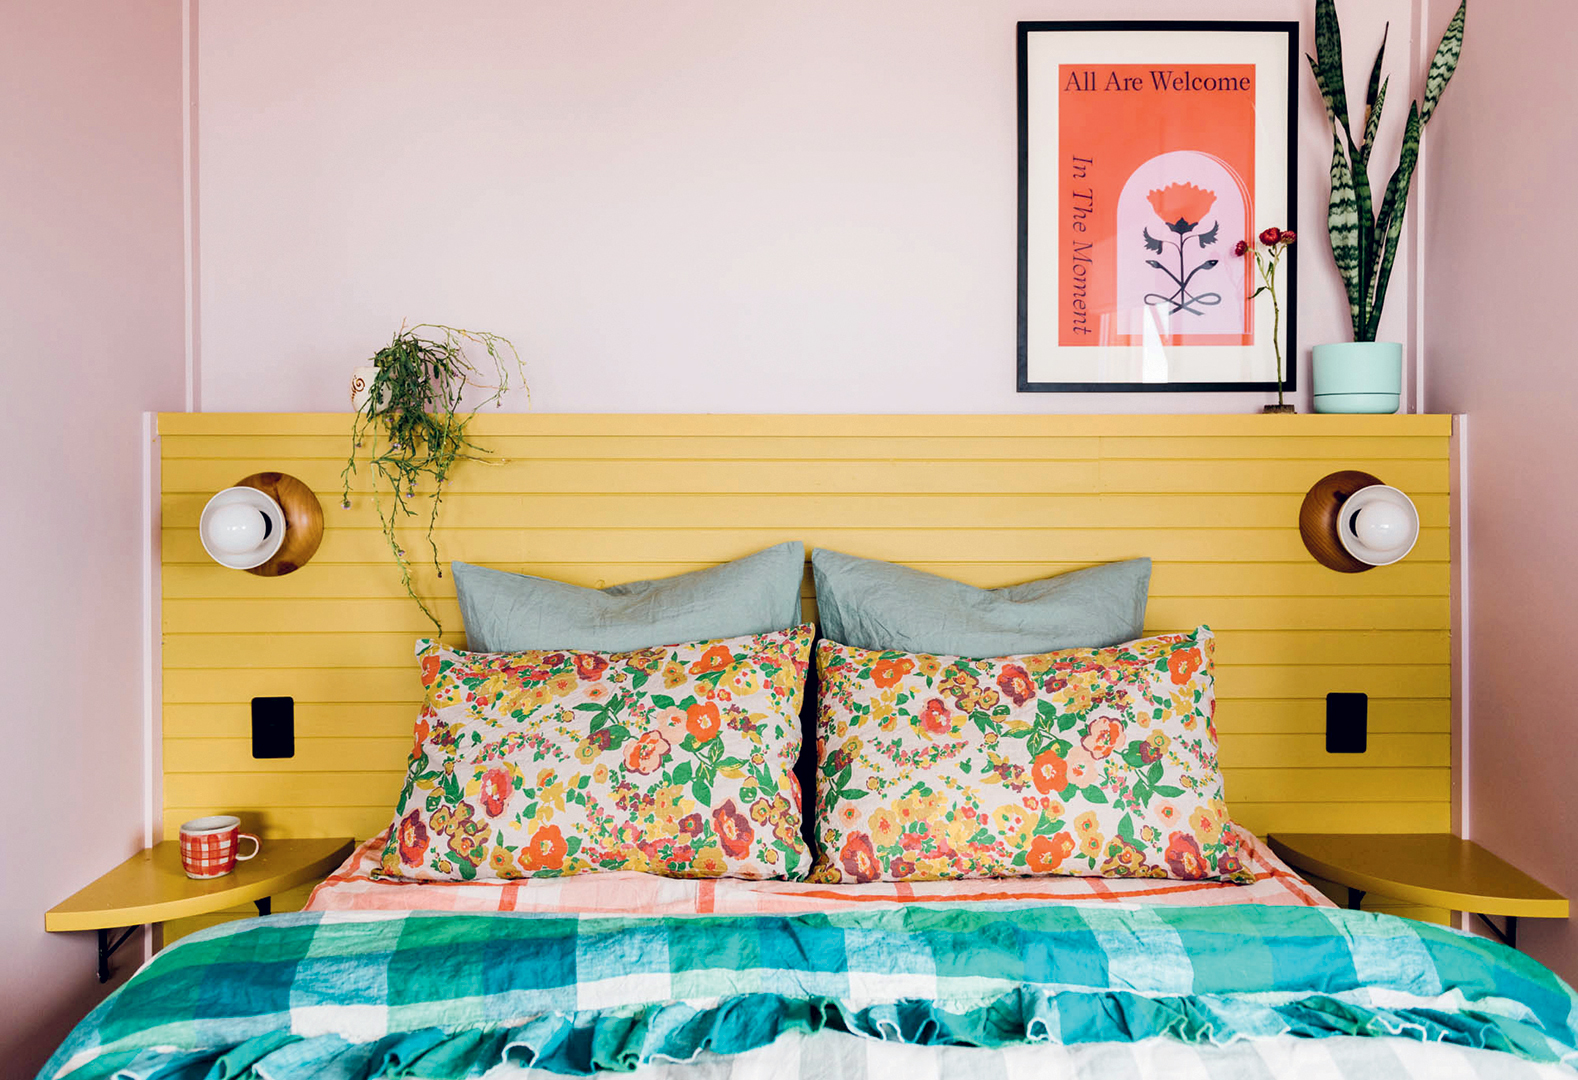 Bed with yellow headboard and colorful bedding